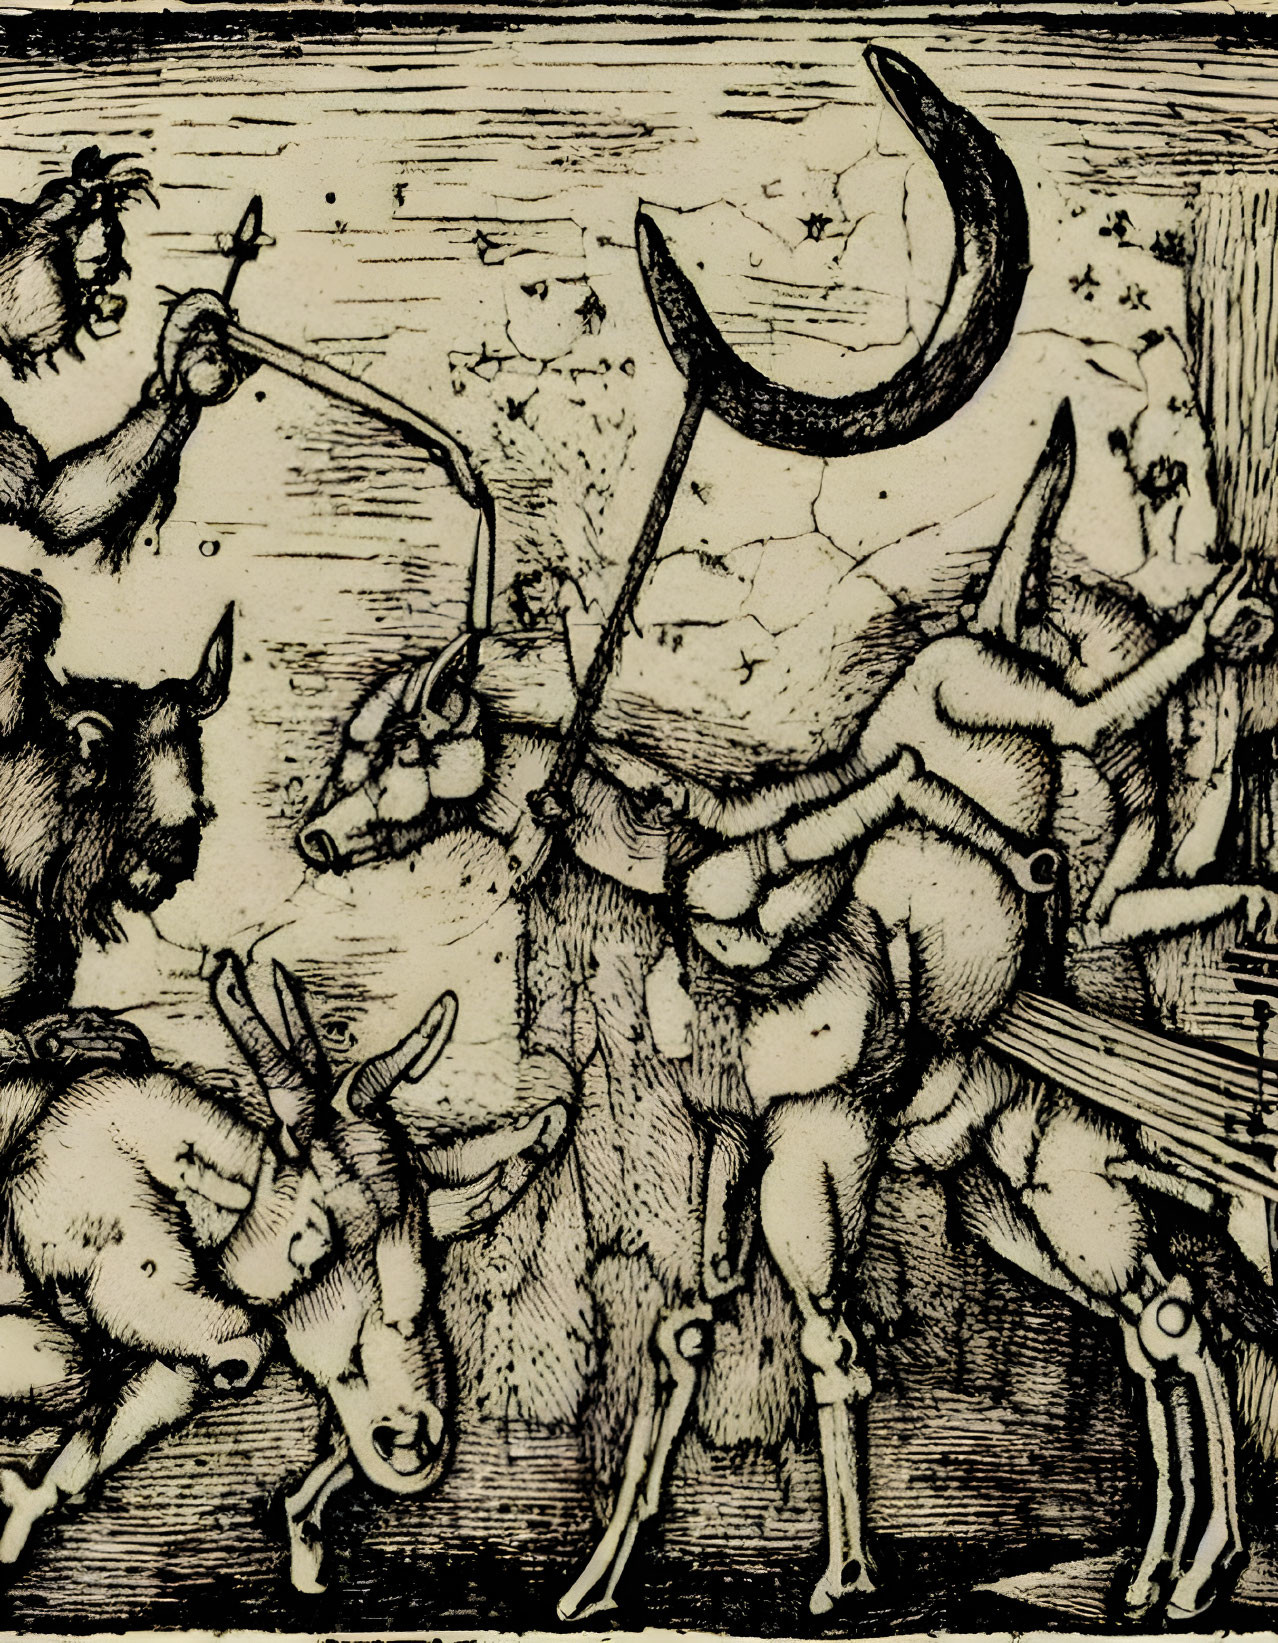 Monochrome etching of pigs in soldier attire with human traits preparing for battle